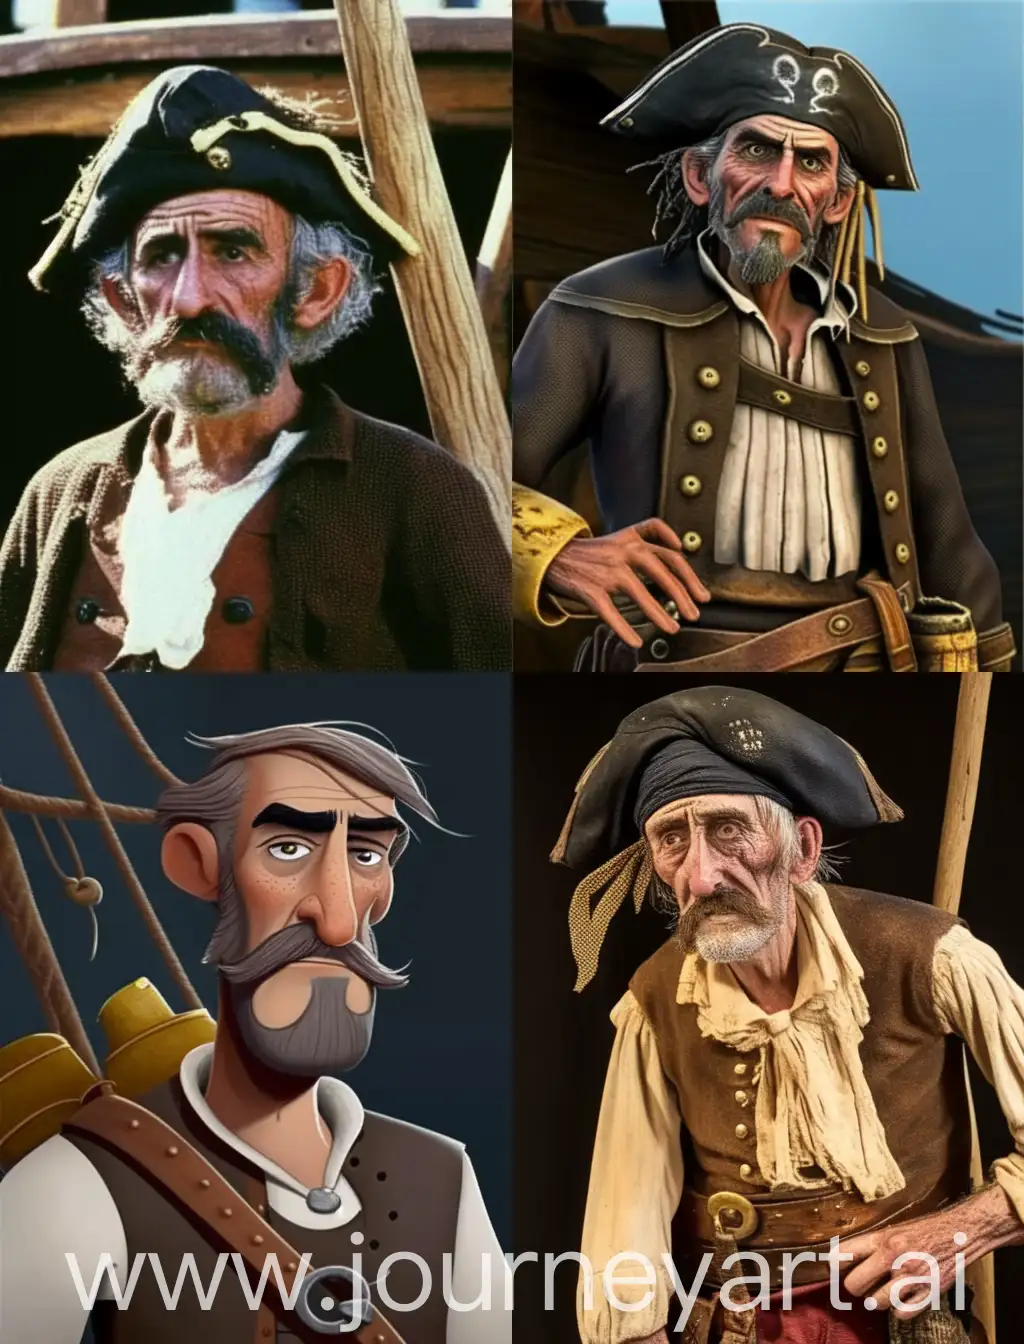 Weathered-Pirate-Charlie-Butter-with-Wooden-Prosthesis